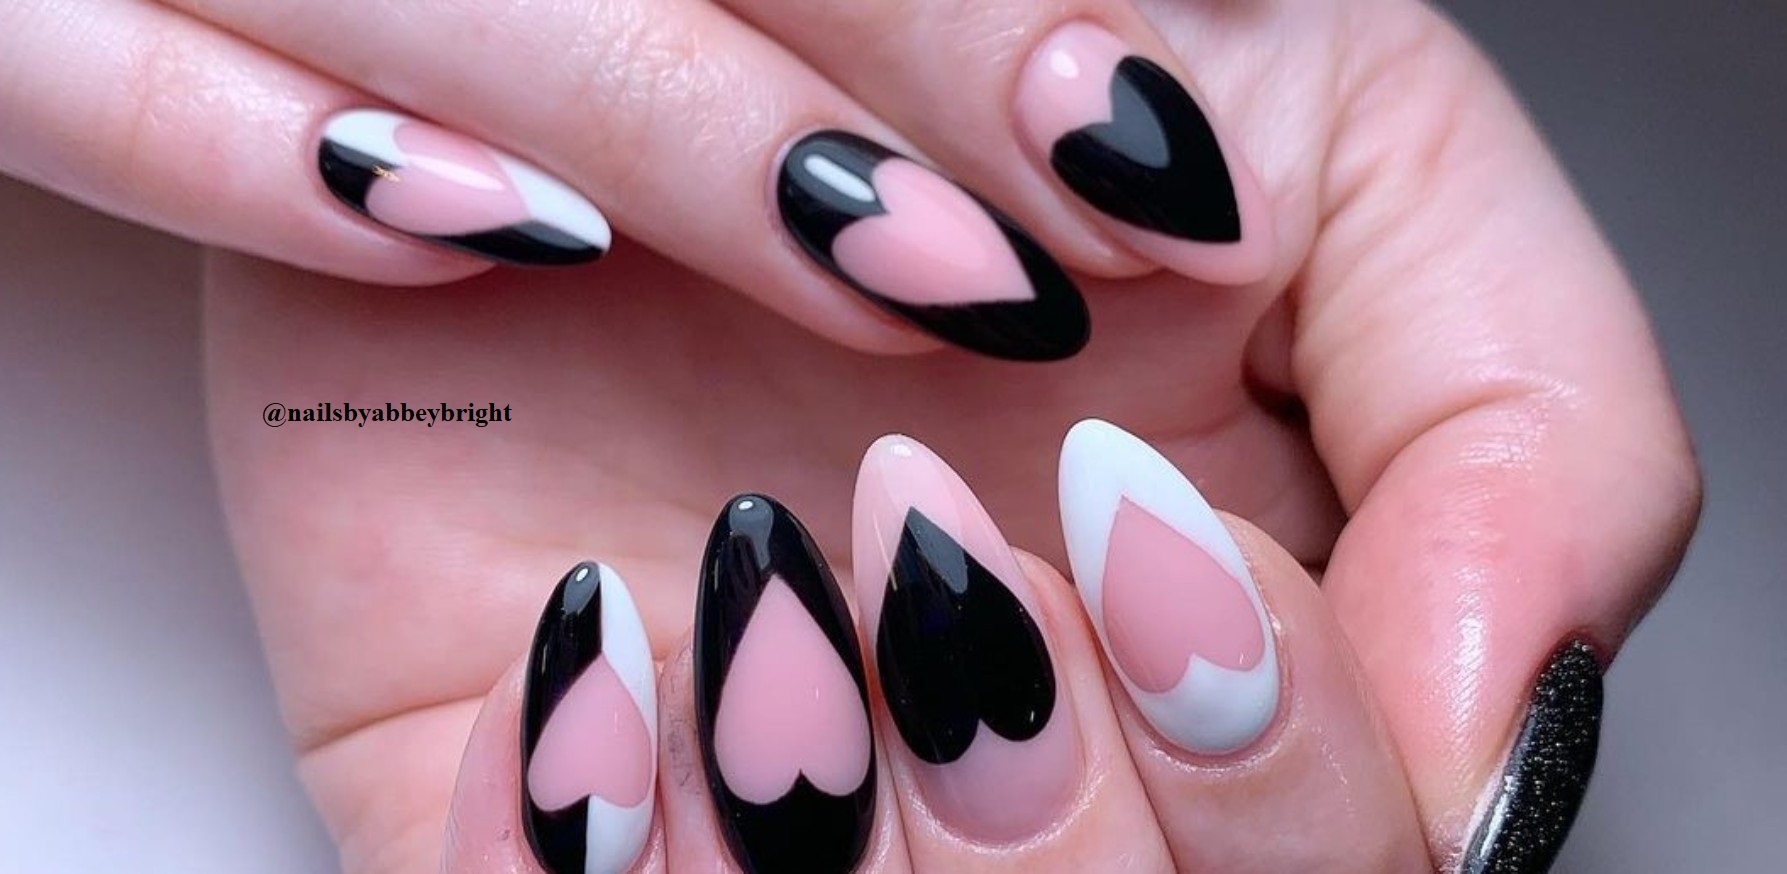 Monochrome Nails Are Perfect For Summer - Here's Proof